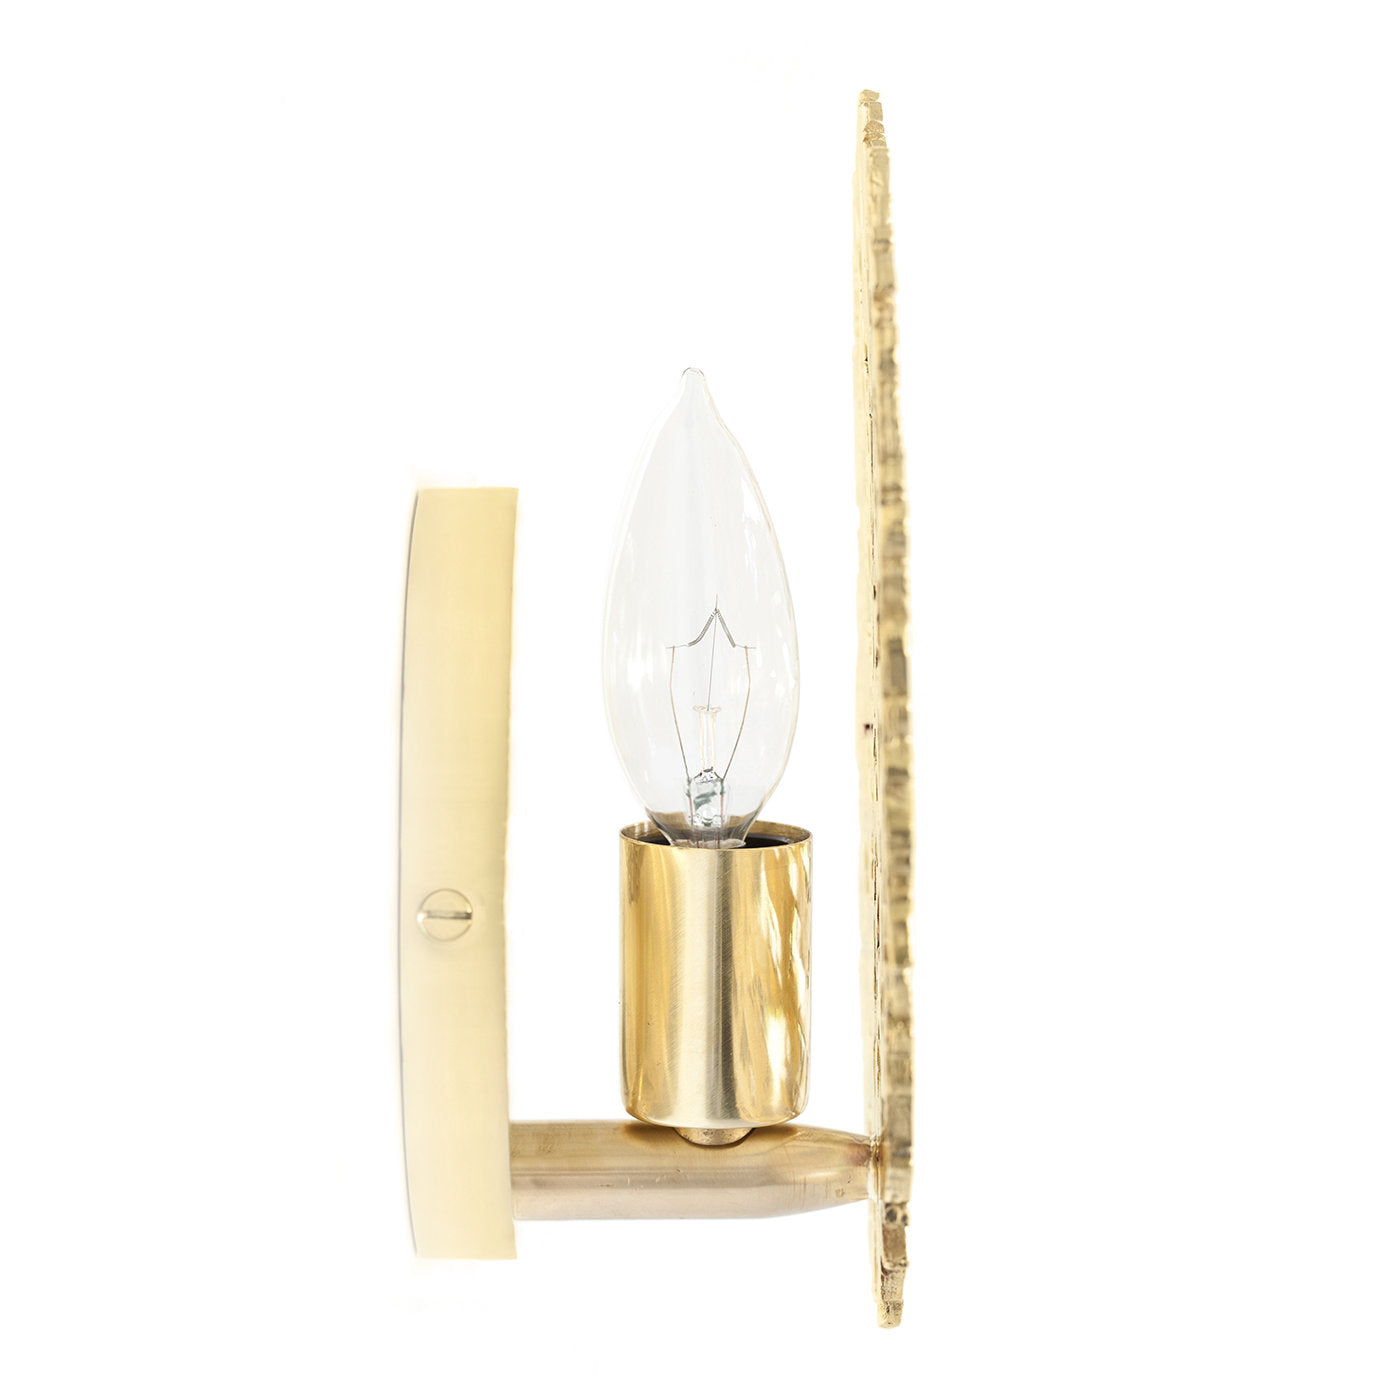 Johnnie Wall Sconce in Gold - Alternative view 3